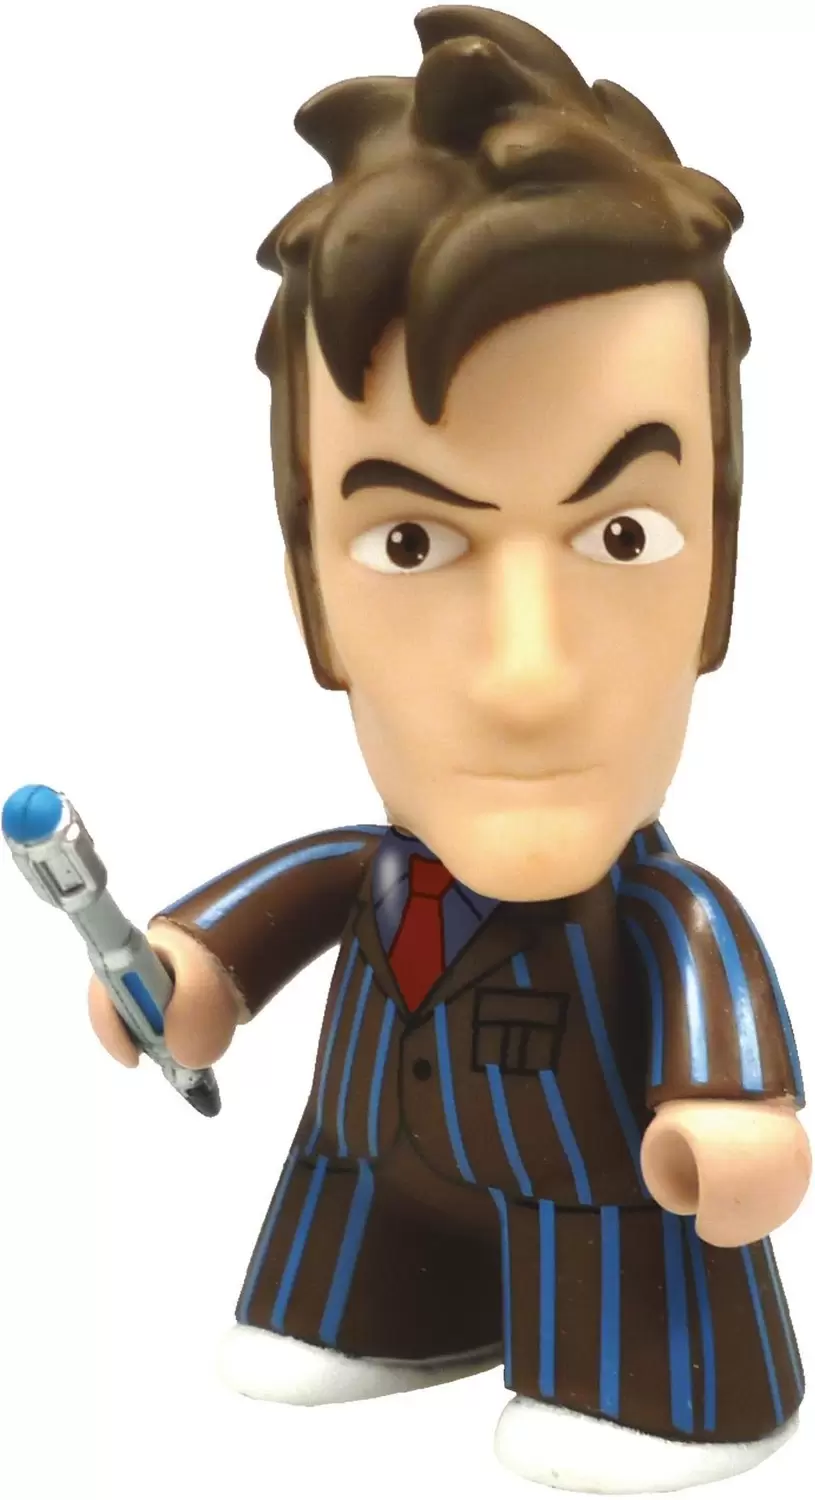 TITANS Big Sizes, Pack and Exclusives - Doctor Who TITANS - 10th Doctor Variant